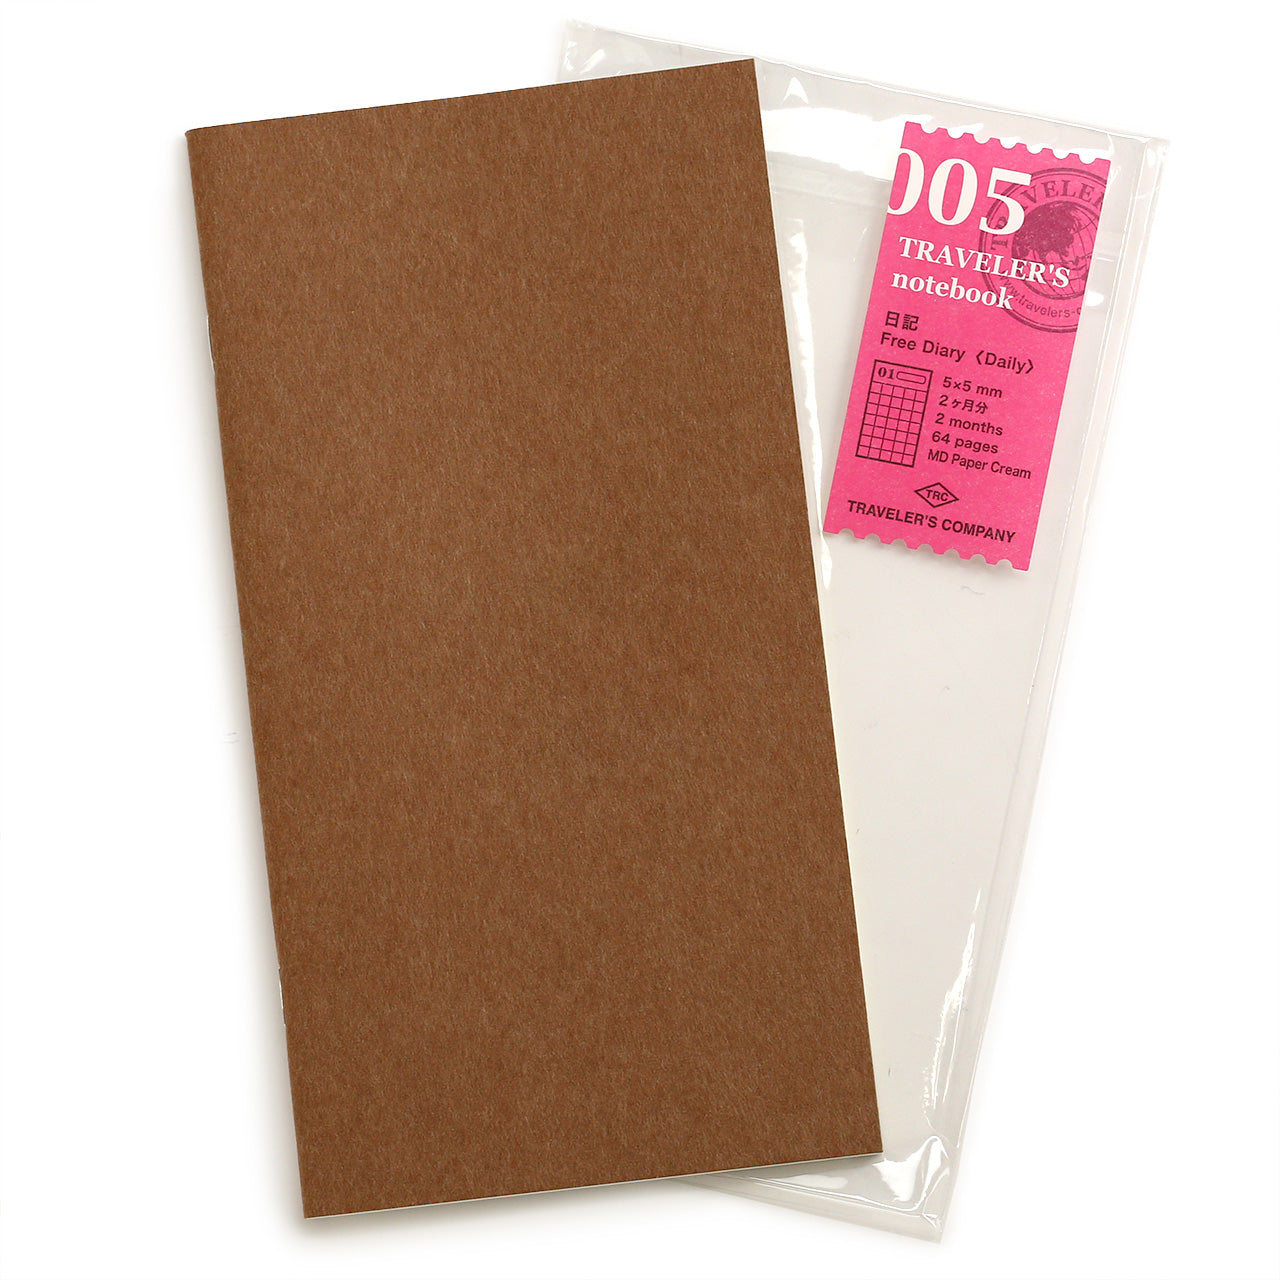 refill book kraft cover with  005 pink label